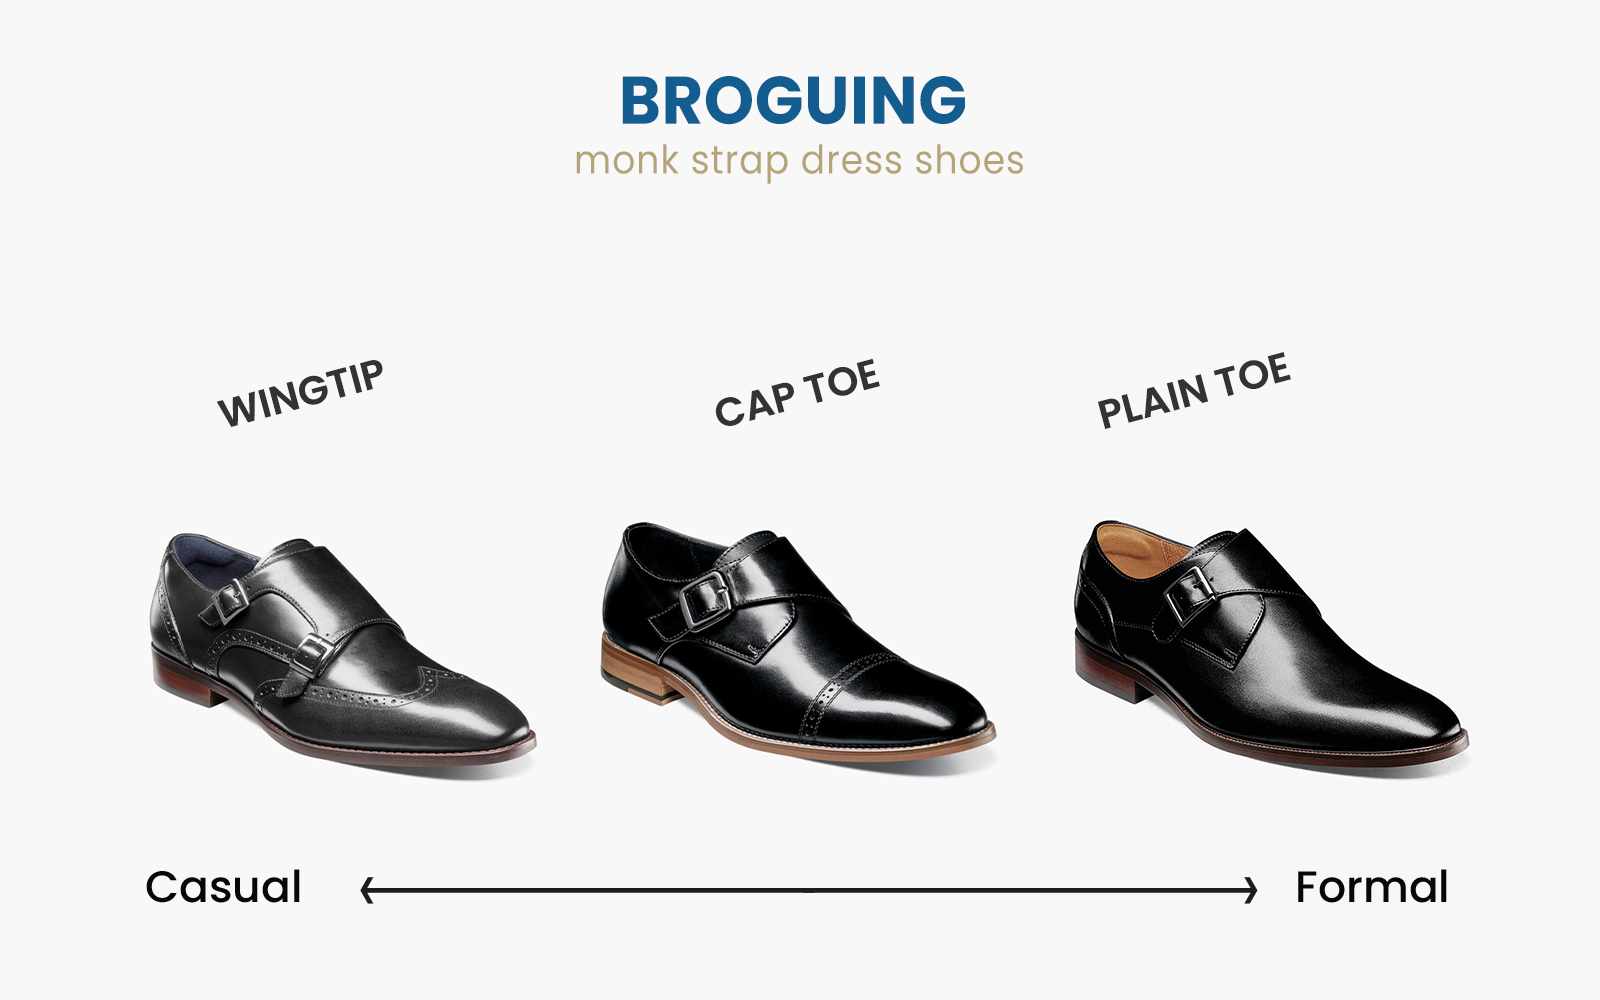 monk strap dress shoes broguing style